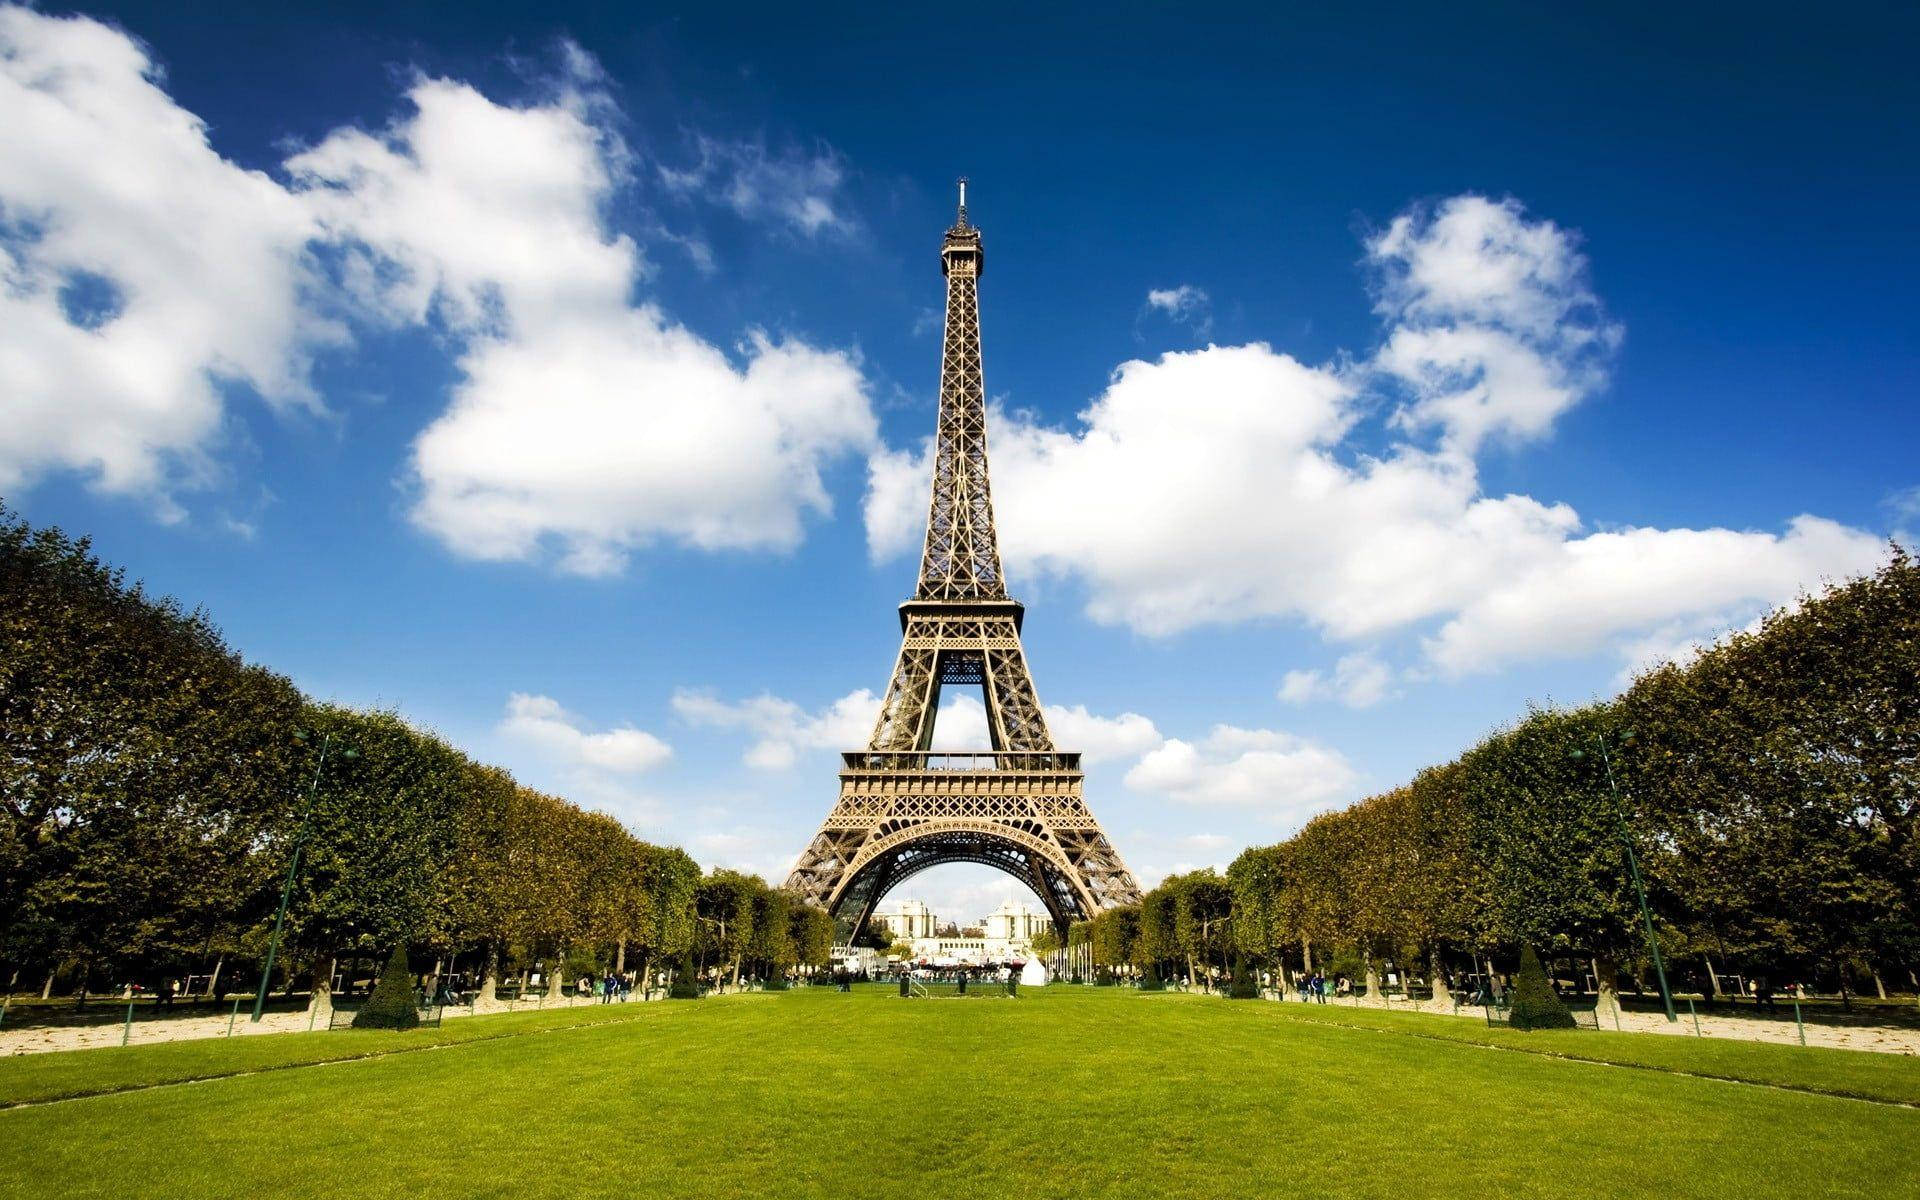 "The iconic Eiffel Tower in Paris, France" Wallpaper